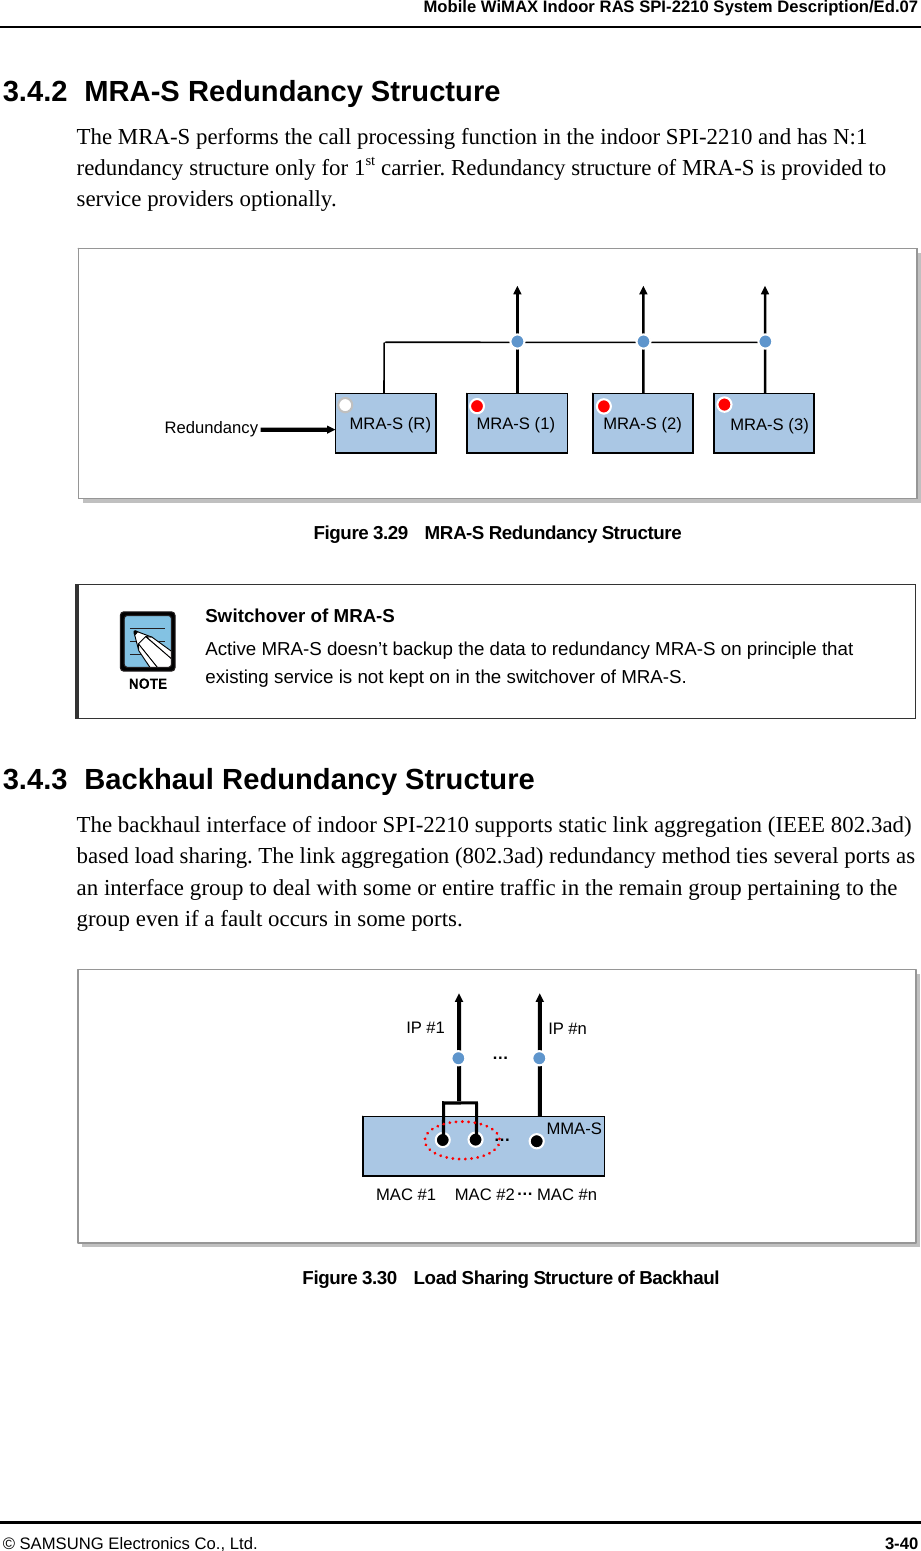   Mobile WiMAX Indoor RAS SPI-2210 System Description/Ed.07 © SAMSUNG Electronics Co., Ltd.  3-40 3.4.2 MRA-S Redundancy Structure The MRA-S performs the call processing function in the indoor SPI-2210 and has N:1 redundancy structure only for 1st carrier. Redundancy structure of MRA-S is provided to service providers optionally.  Figure 3.29    MRA-S Redundancy Structure    Switchover of MRA-S   Active MRA-S doesn’t backup the data to redundancy MRA-S on principle that existing service is not kept on in the switchover of MRA-S.  3.4.3  Backhaul Redundancy Structure The backhaul interface of indoor SPI-2210 supports static link aggregation (IEEE 802.3ad) based load sharing. The link aggregation (802.3ad) redundancy method ties several ports as an interface group to deal with some or entire traffic in the remain group pertaining to the group even if a fault occurs in some ports.  Figure 3.30    Load Sharing Structure of Backhaul  Redundancy MRA-S (R) MRA-S (1) MRA-S (2) MRA-S (3) MMA-S …IP #1 IP #n MAC #1  MAC #2 MAC #n ……